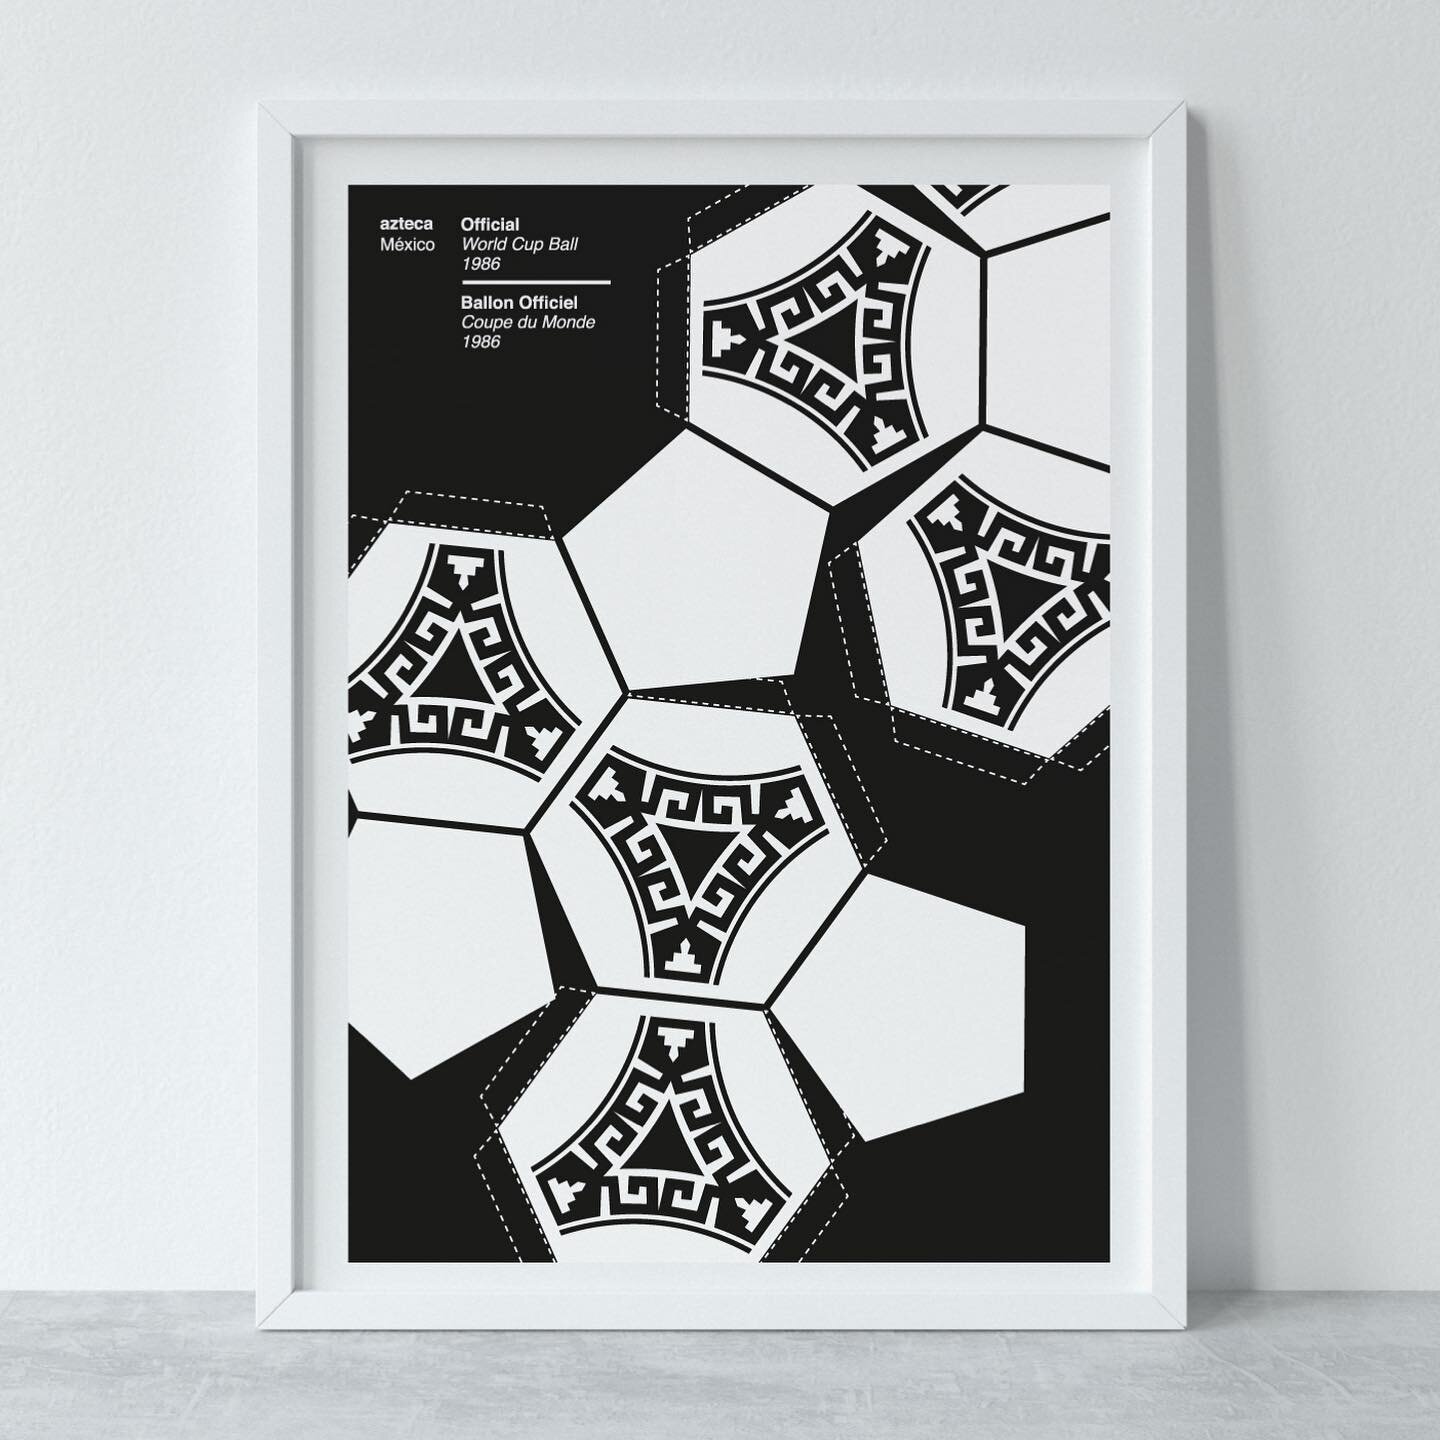 Monochromatic week. 
Love a bit of mono artwork. Bold, clean and goes with any decor. 
Azteca-Mexico&rsquo;86 is a tribute to an iconic World Cup and world cup ball. Printed either A2 or A1 on 190gsm matte stock. 

Shop @generalobservatory 
.
.
.
.
.